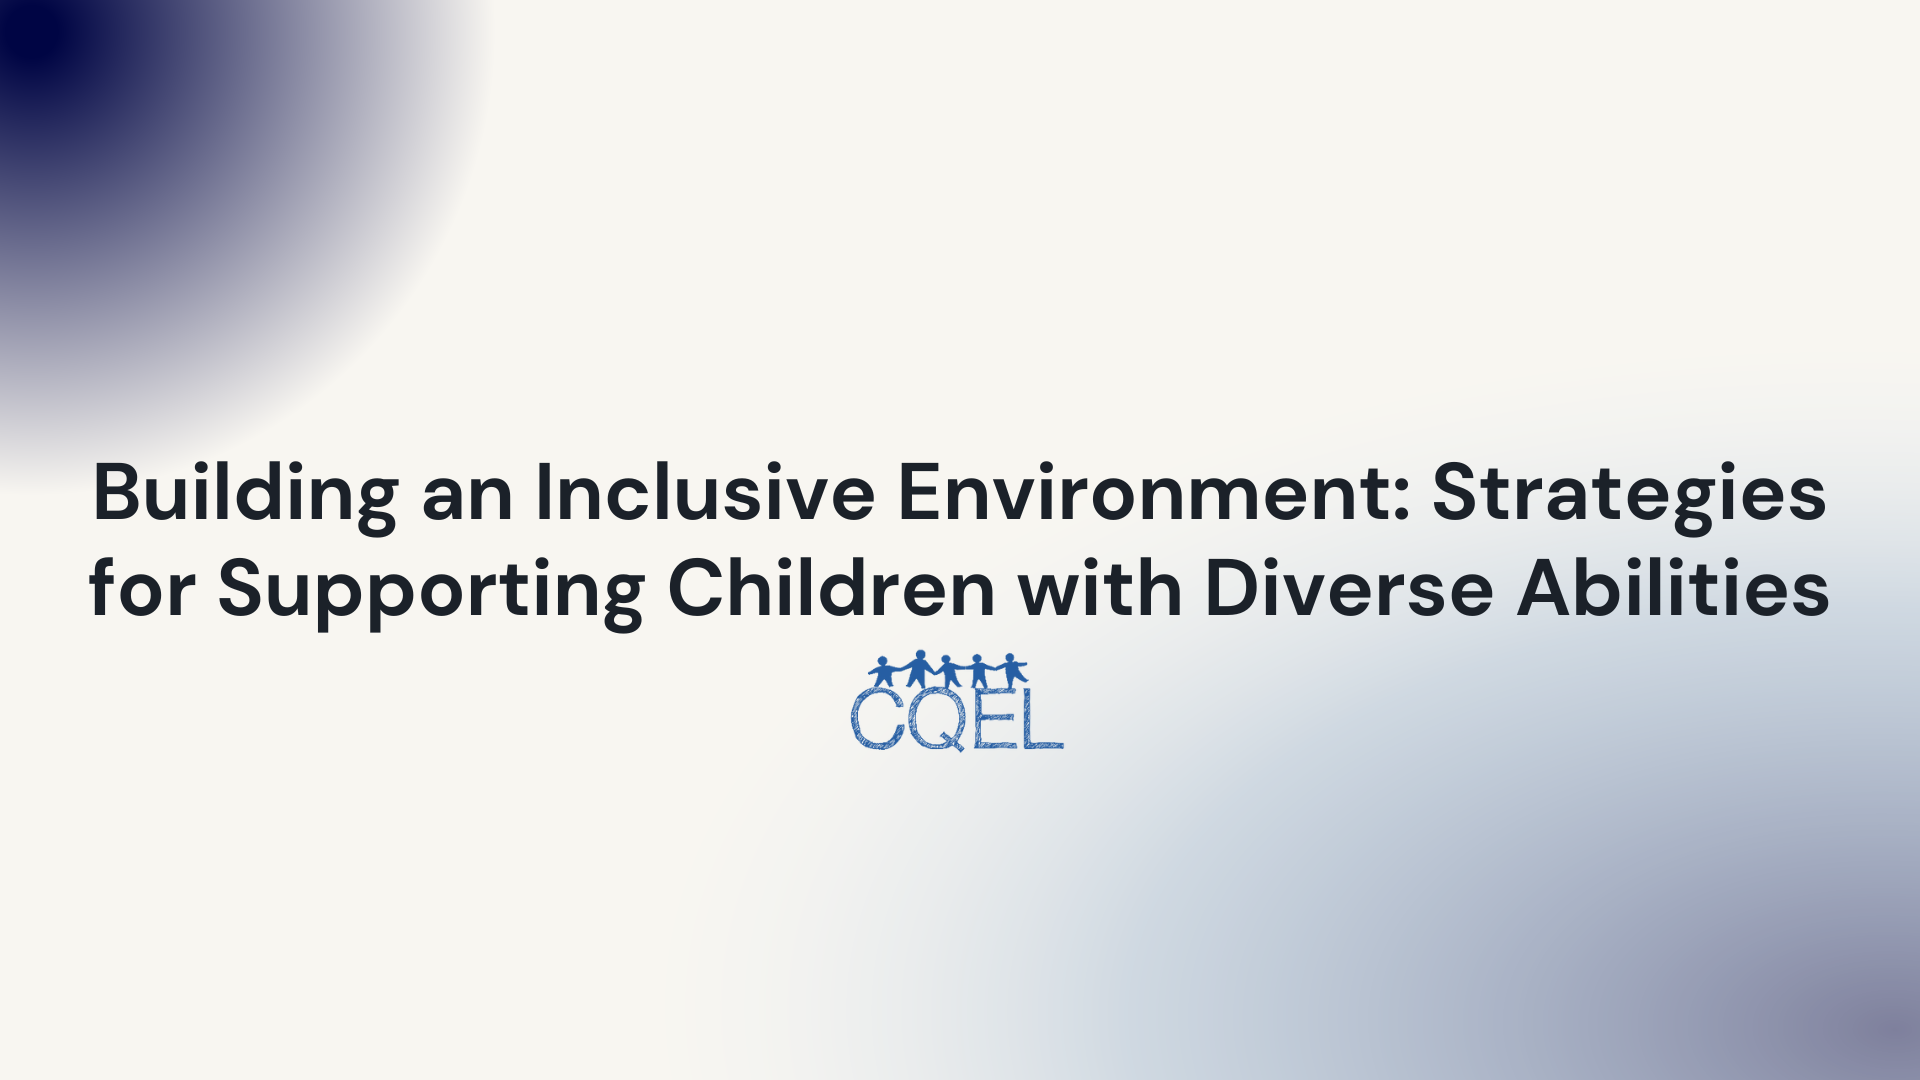 Building an Inclusive Environment: Strategies for Supporting Children with Diverse Abilities